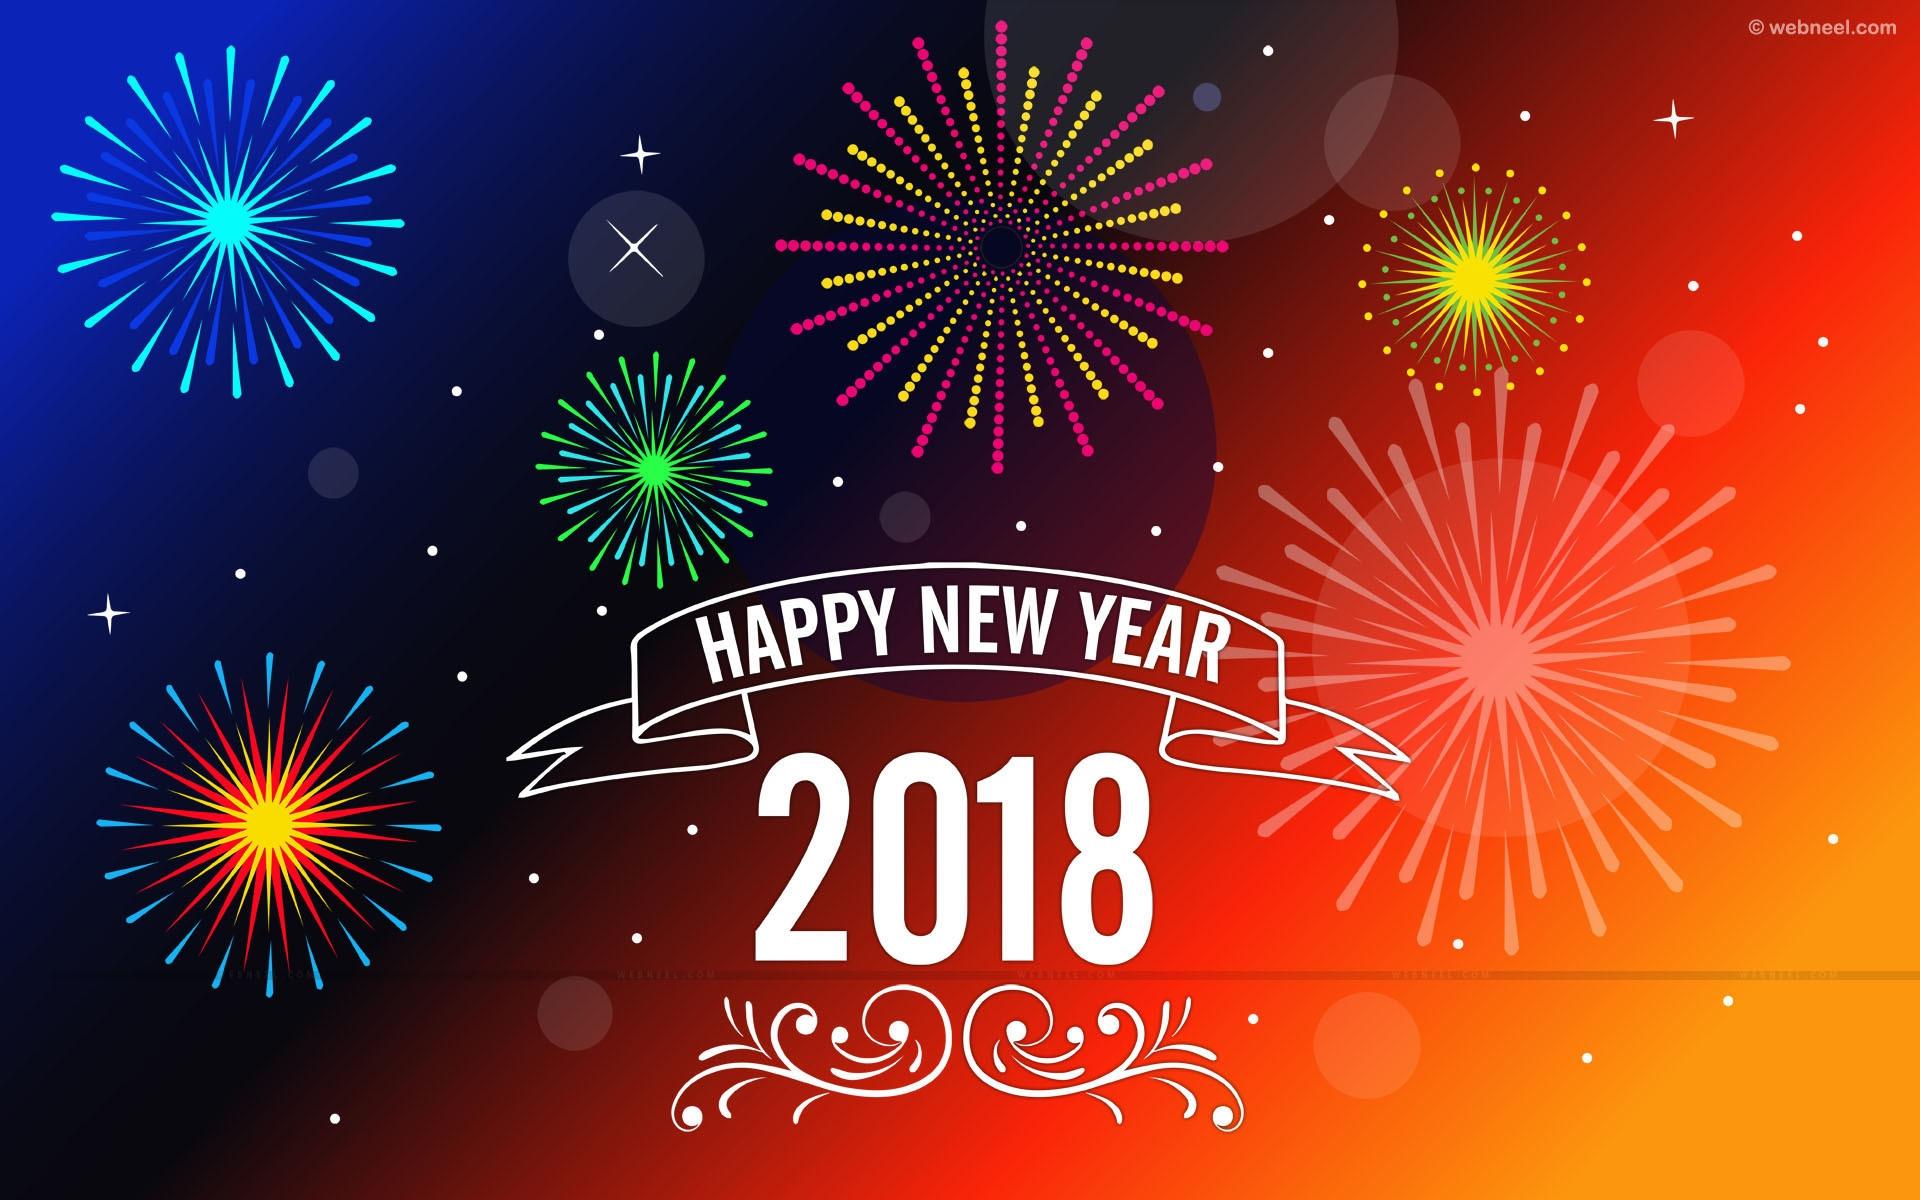 New Year 2018 Wallpapers